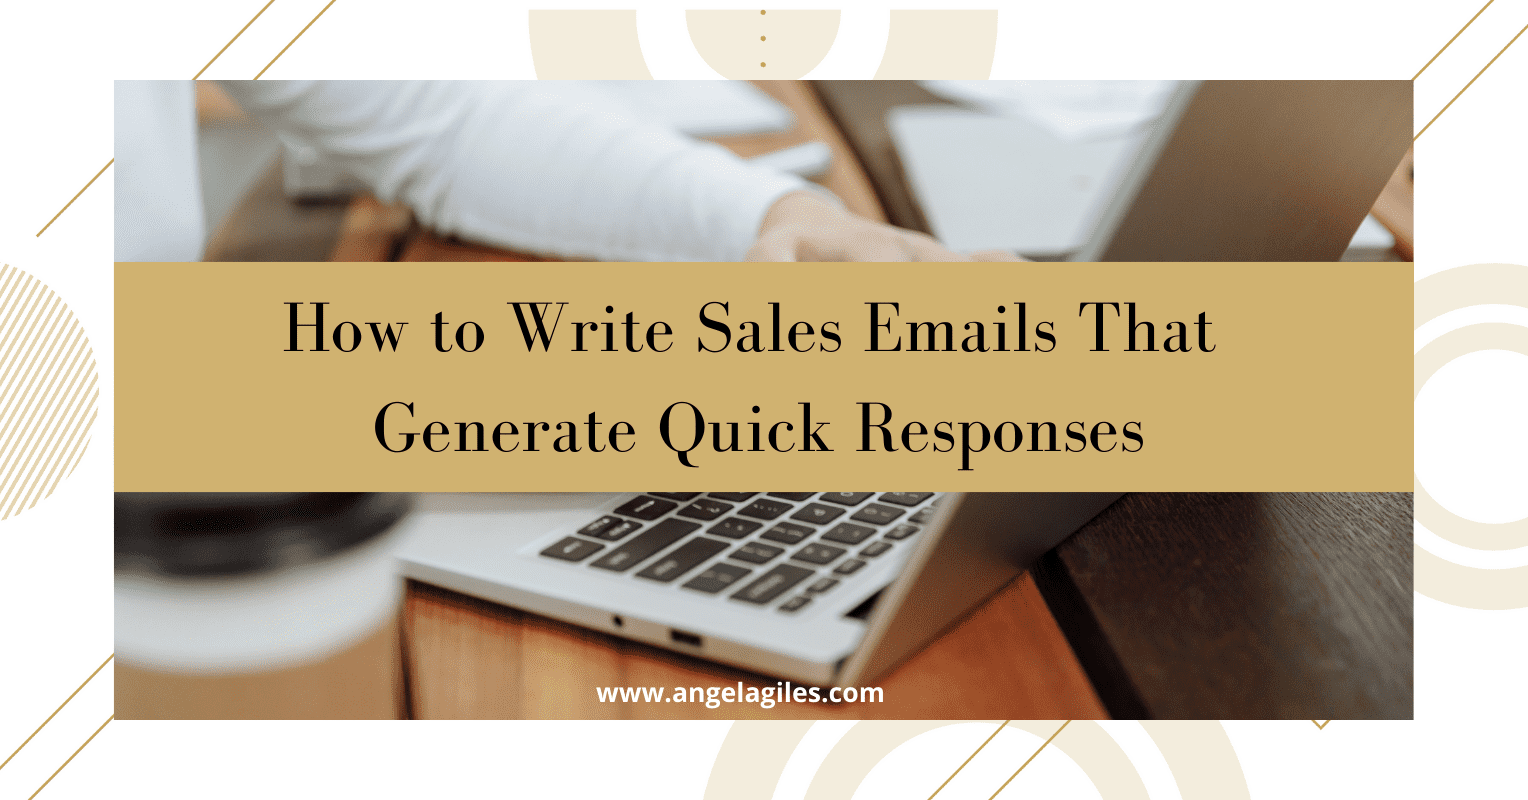 How to Write Sales Emails That Generate Quick Responses